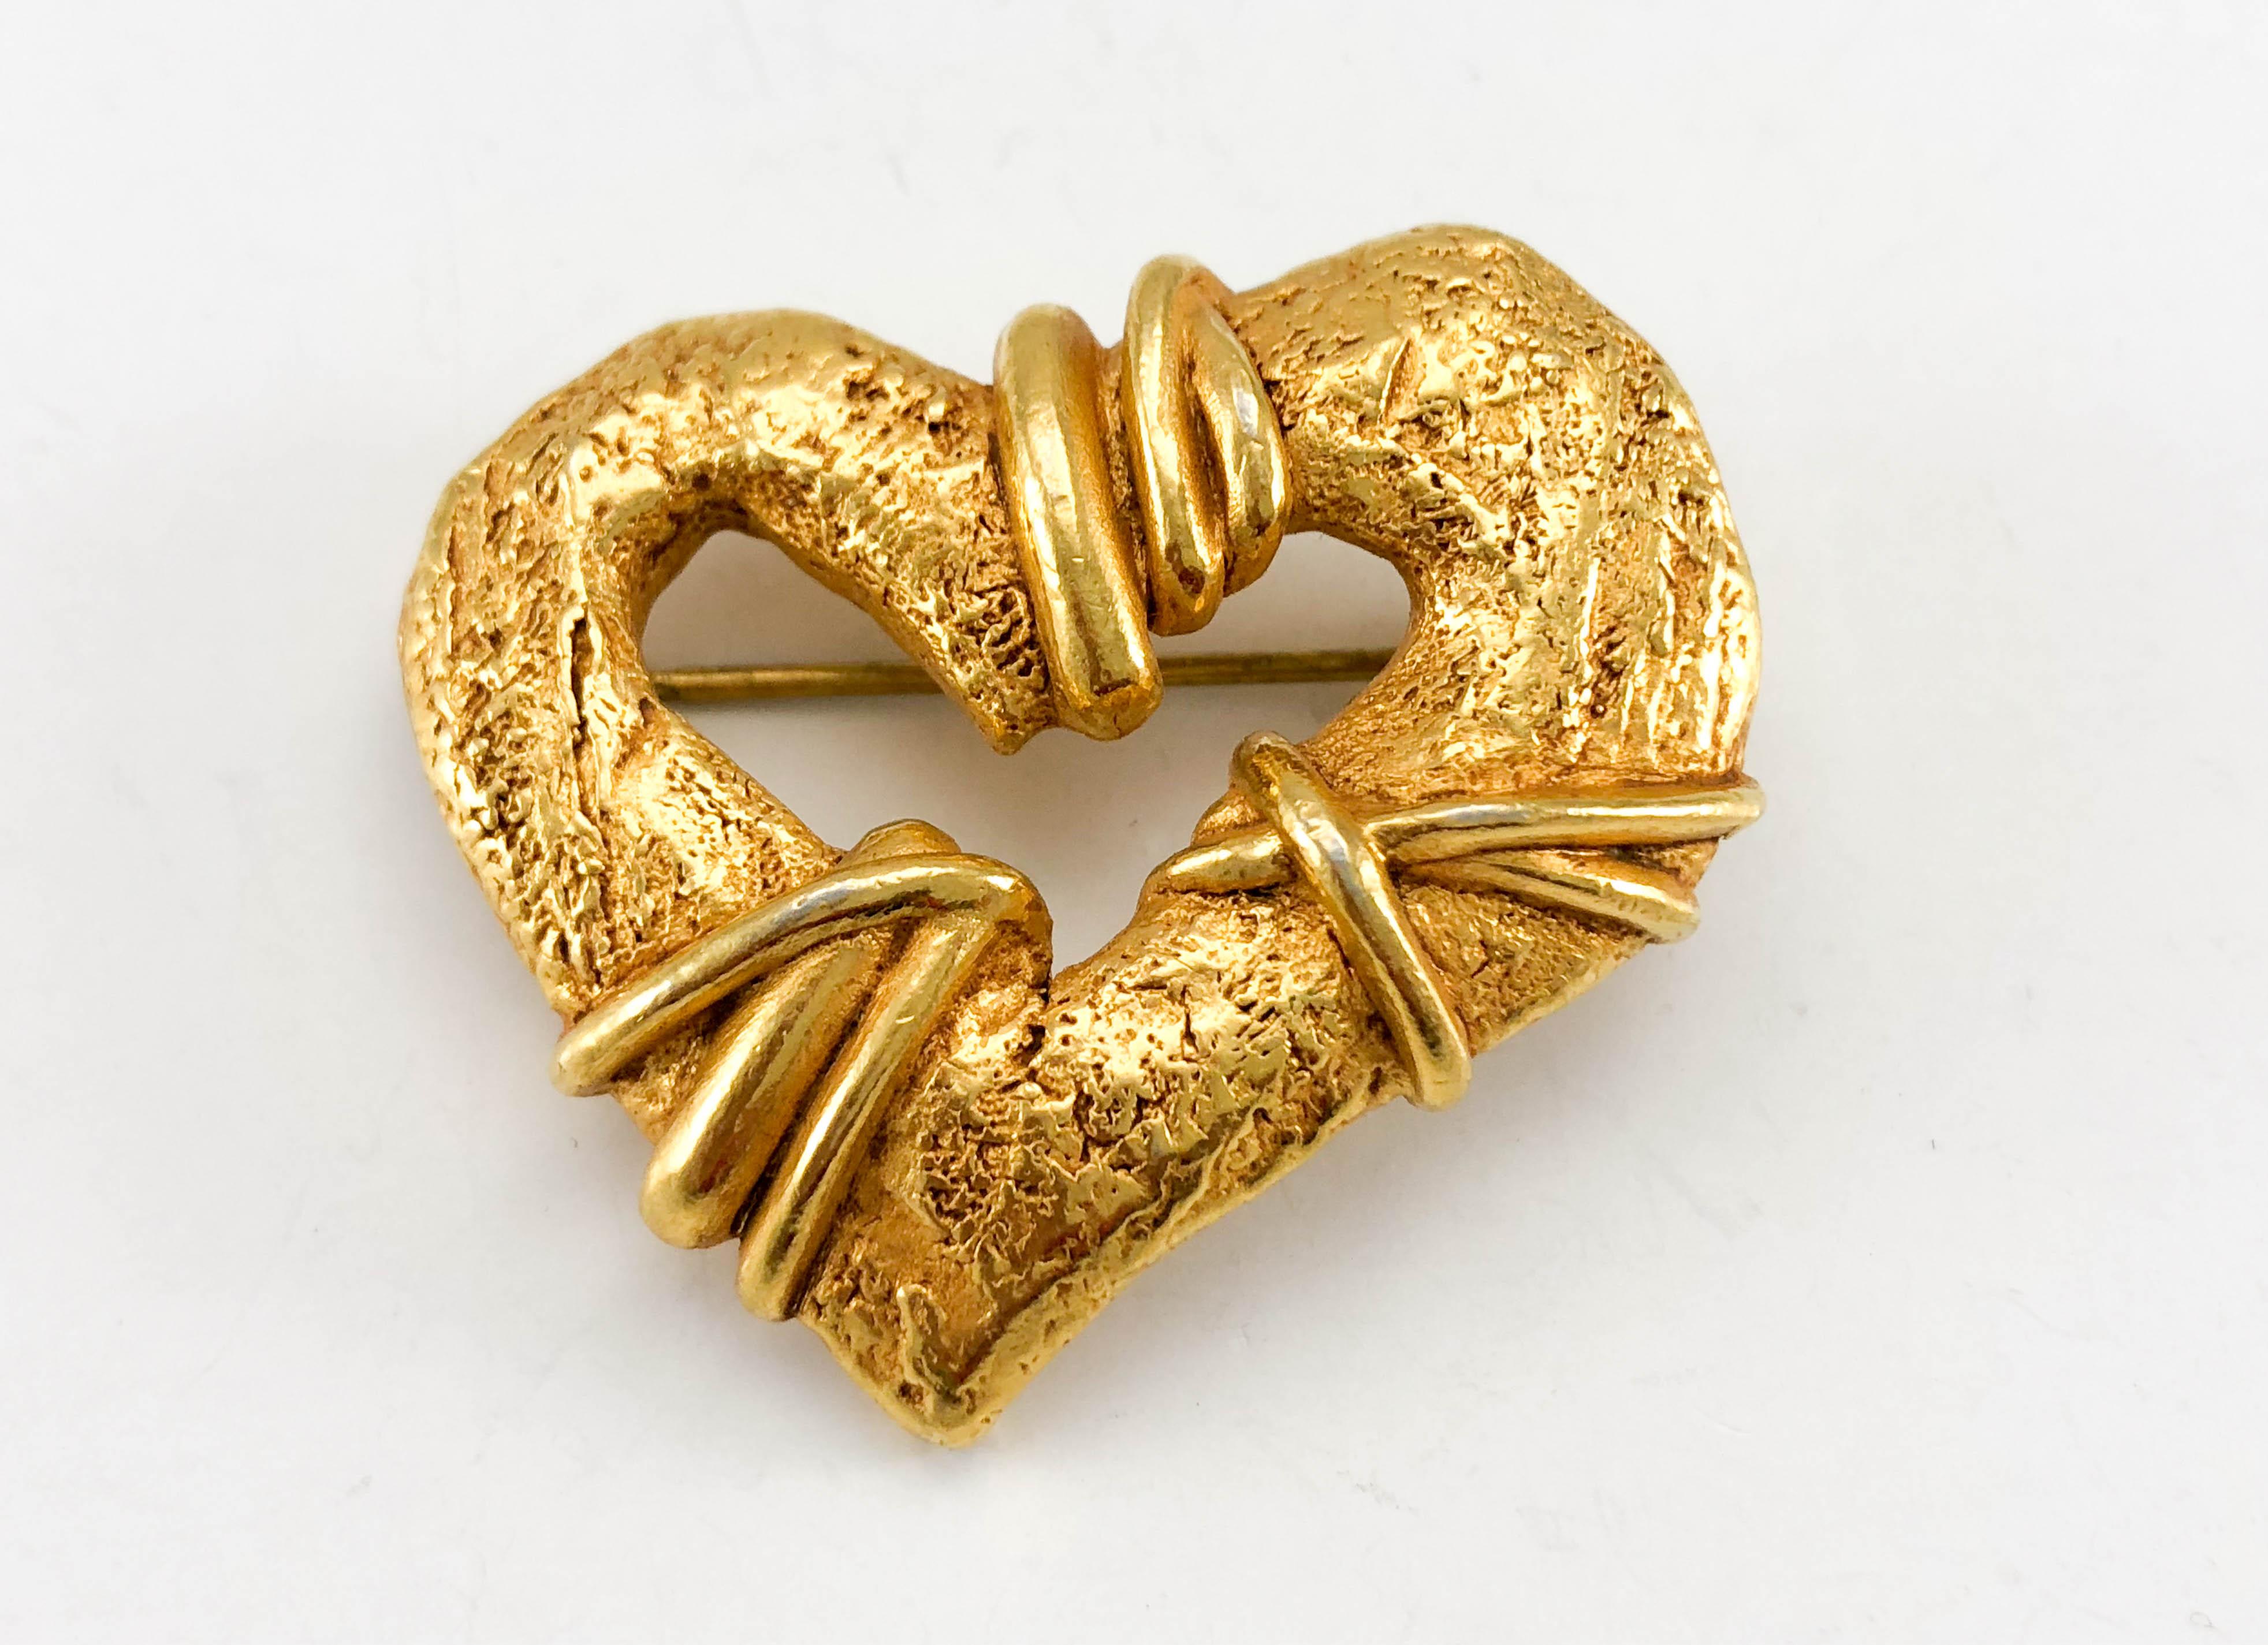 1994 Christian Lacroix Gold-Plated Heart Brooch, by Robert Goossens For Sale 4